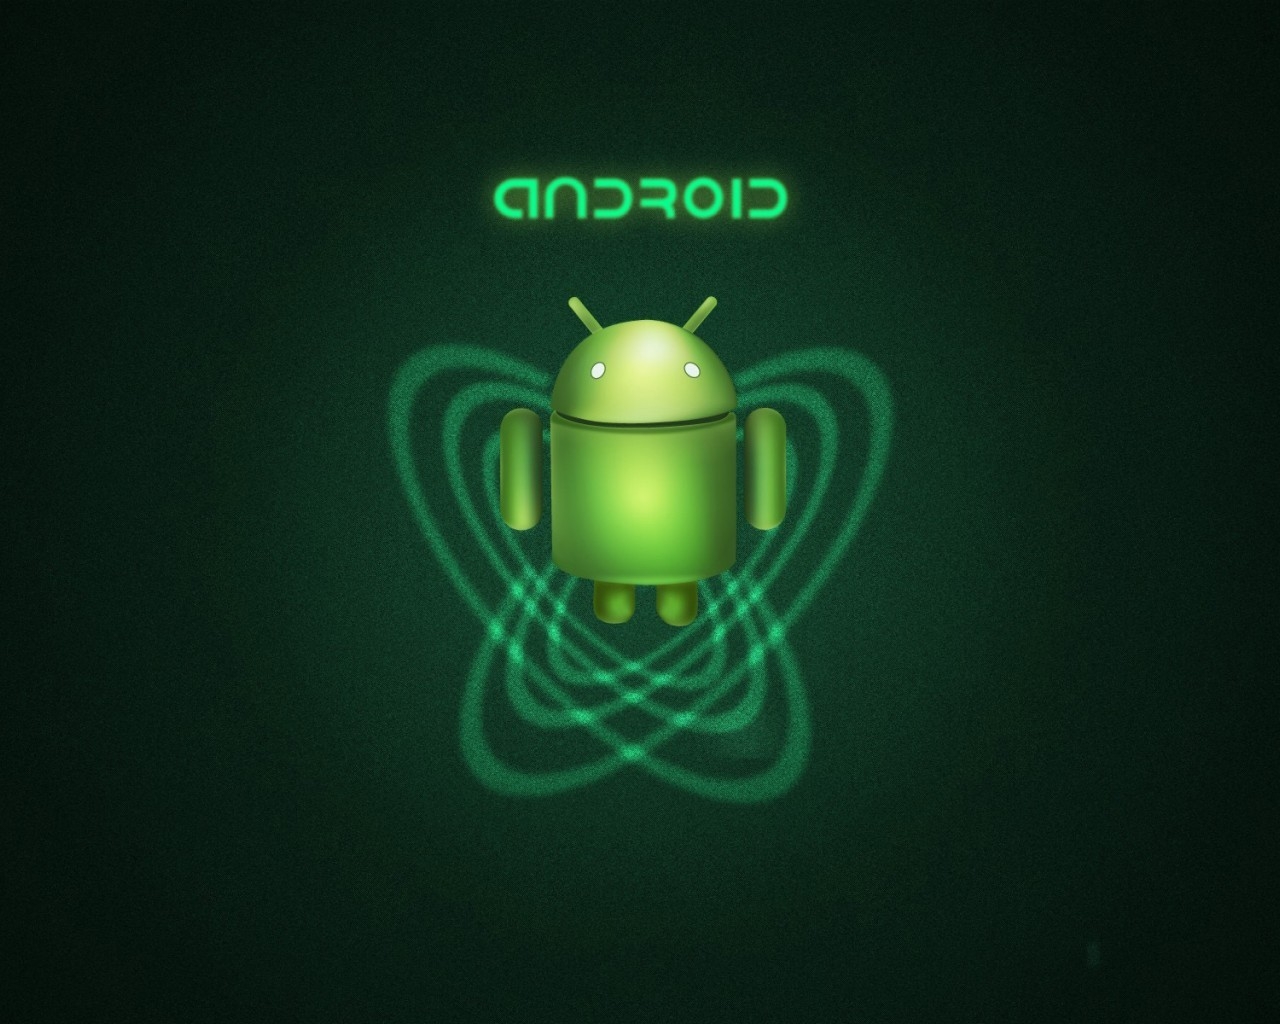 Android Mascot for 1280 x 1024 resolution